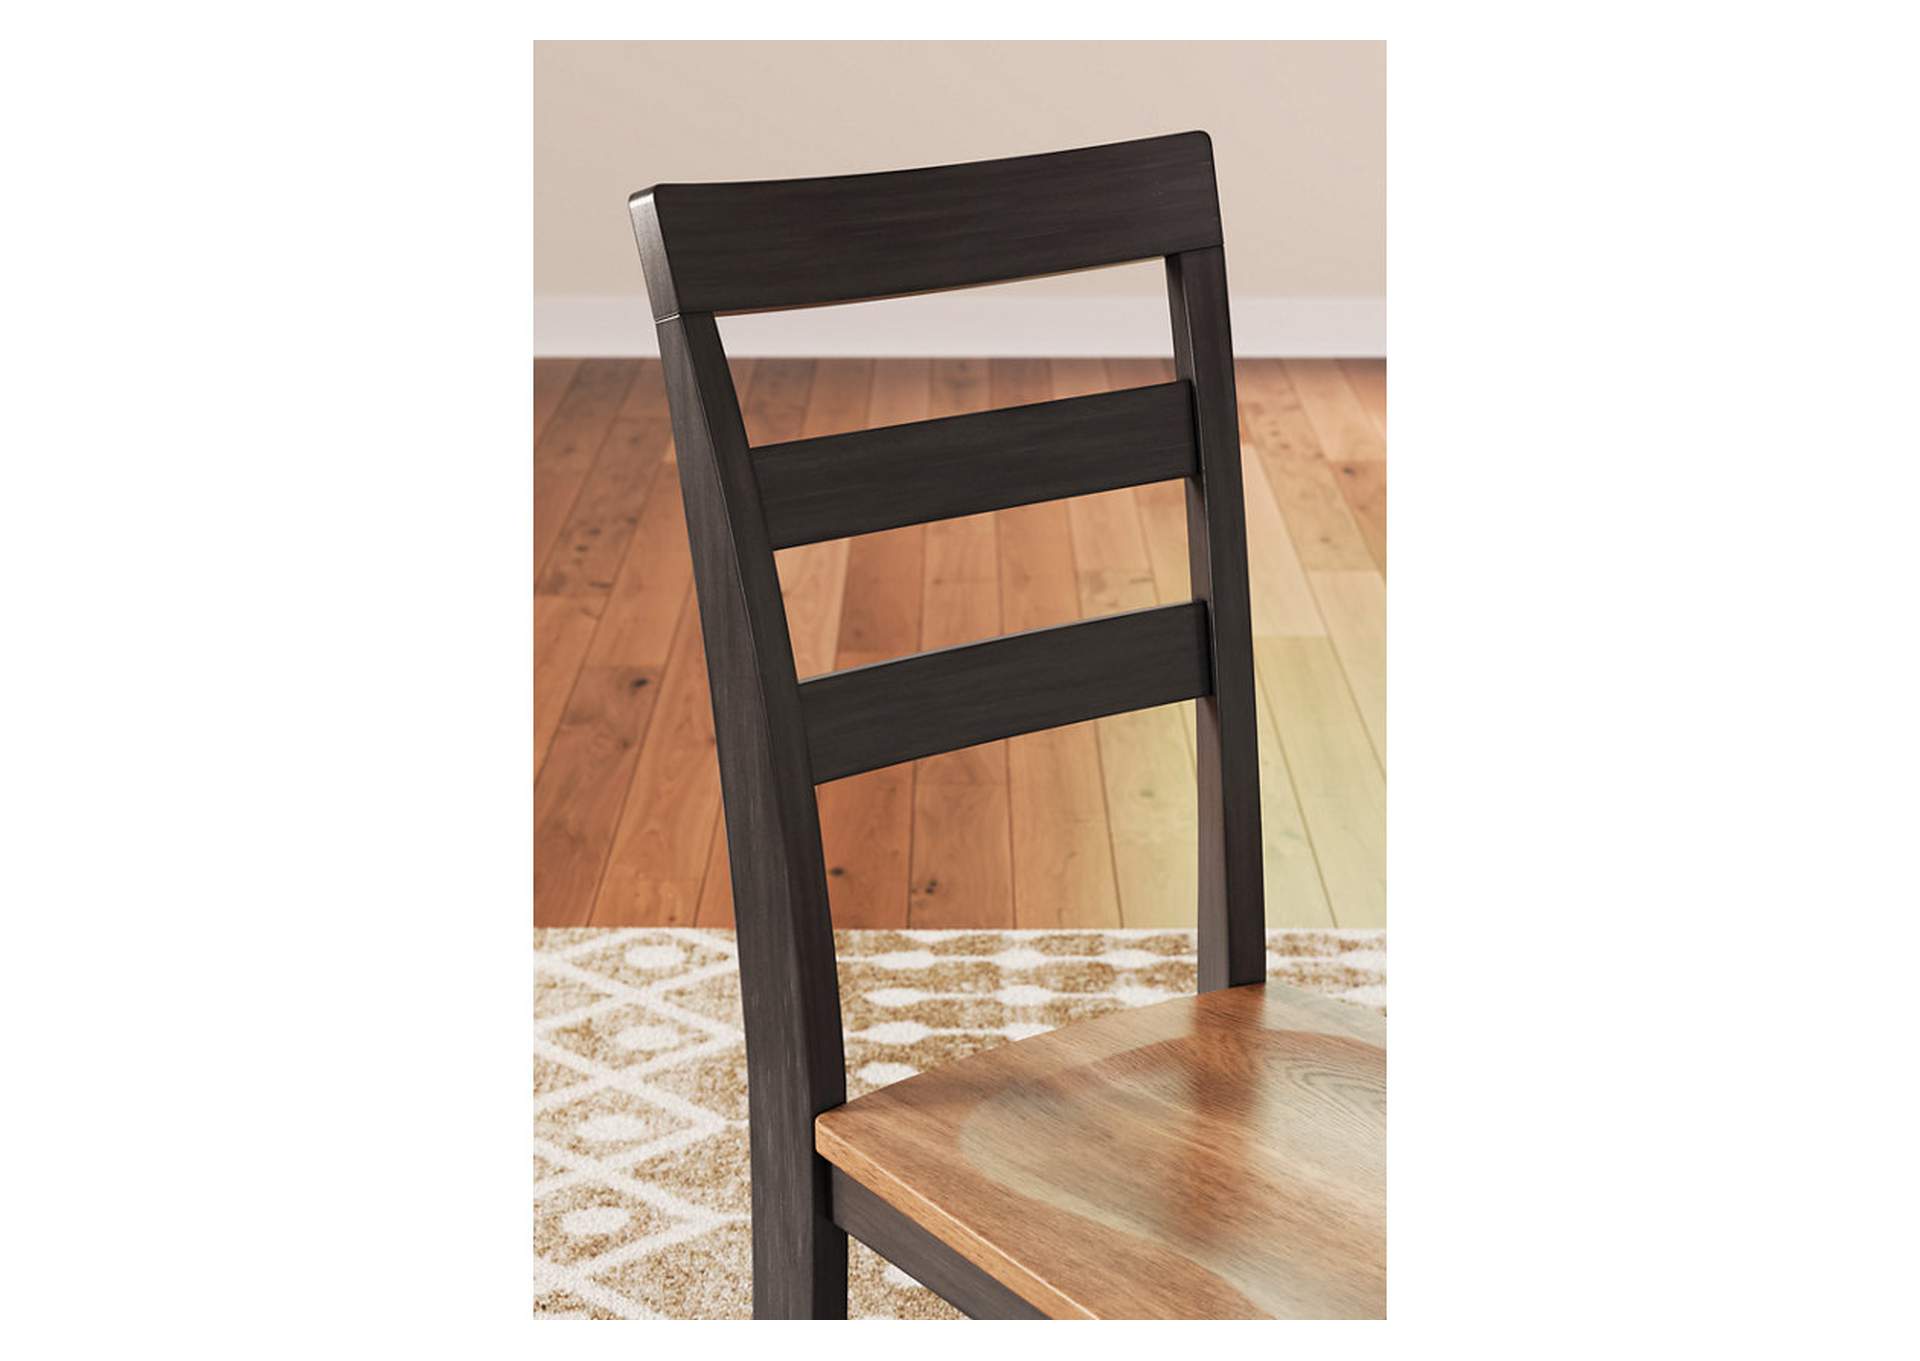 Gesthaven Dining Chair,Signature Design By Ashley